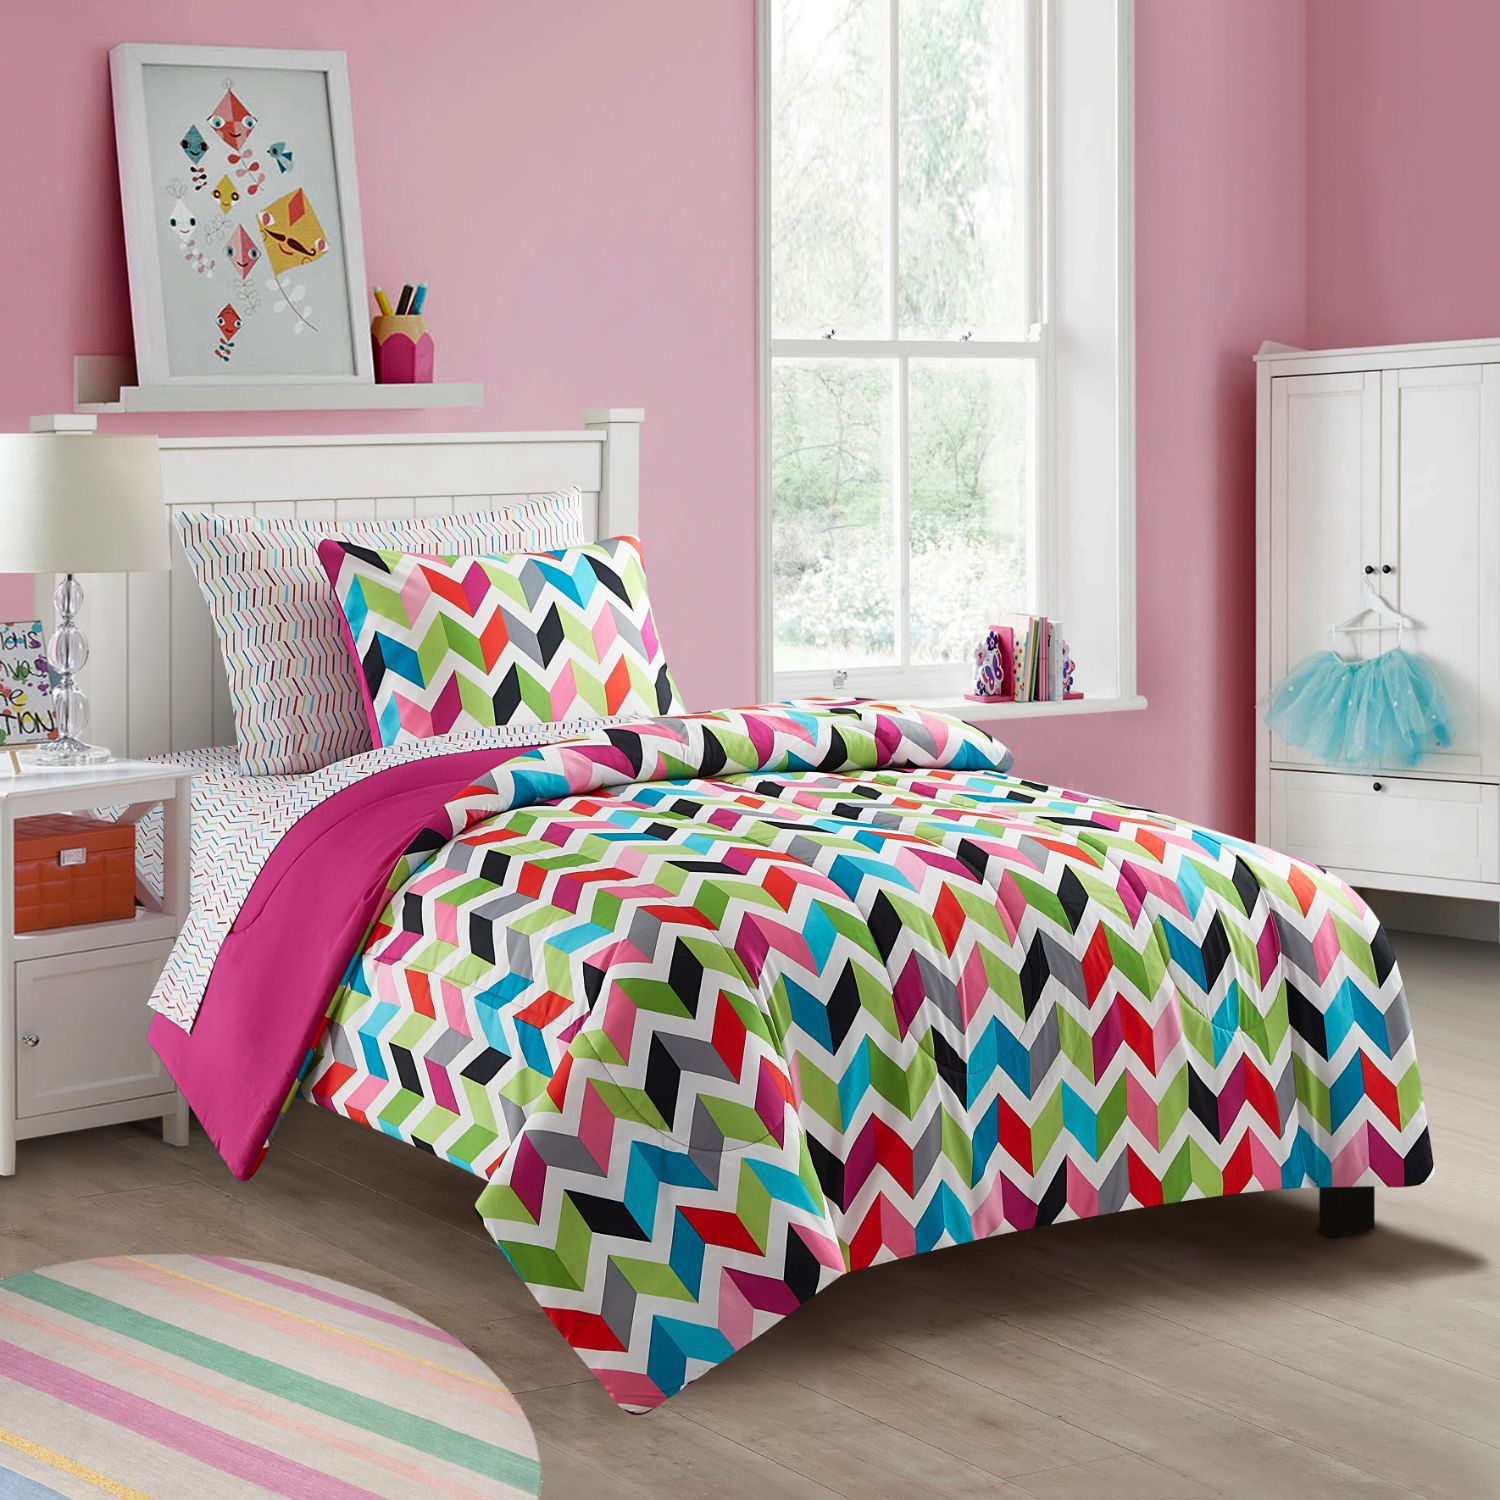 Image for Heritage Kids Bright Colorful Chevron Bedding Set at Kohl's.